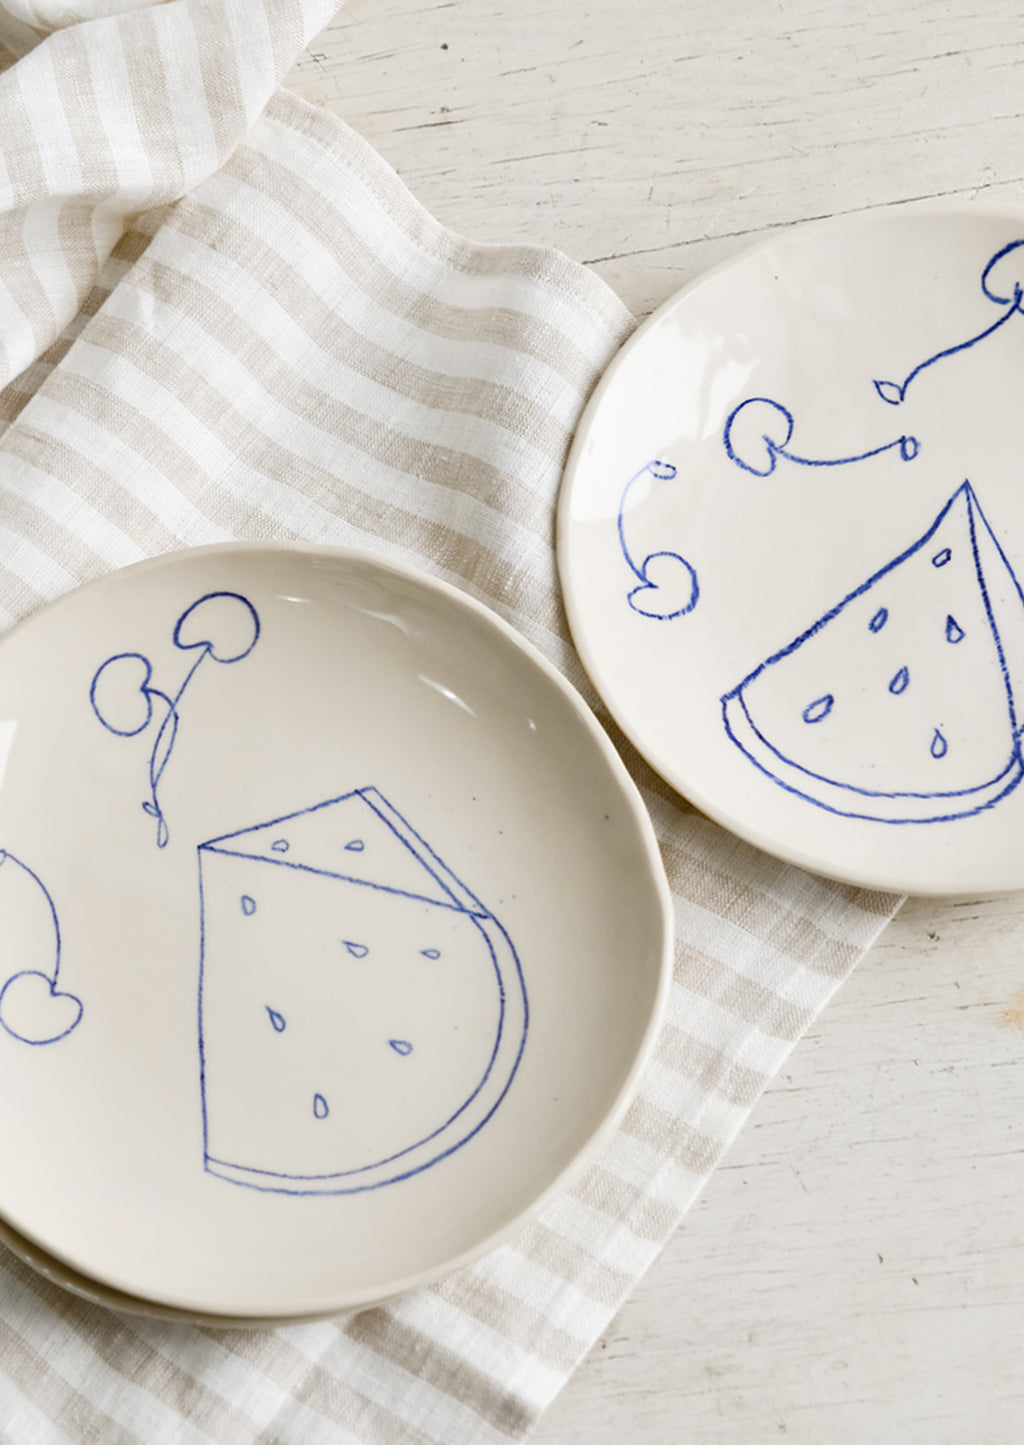 Side Plate: Two ceramic side plates with still life fruit drawings in blue.